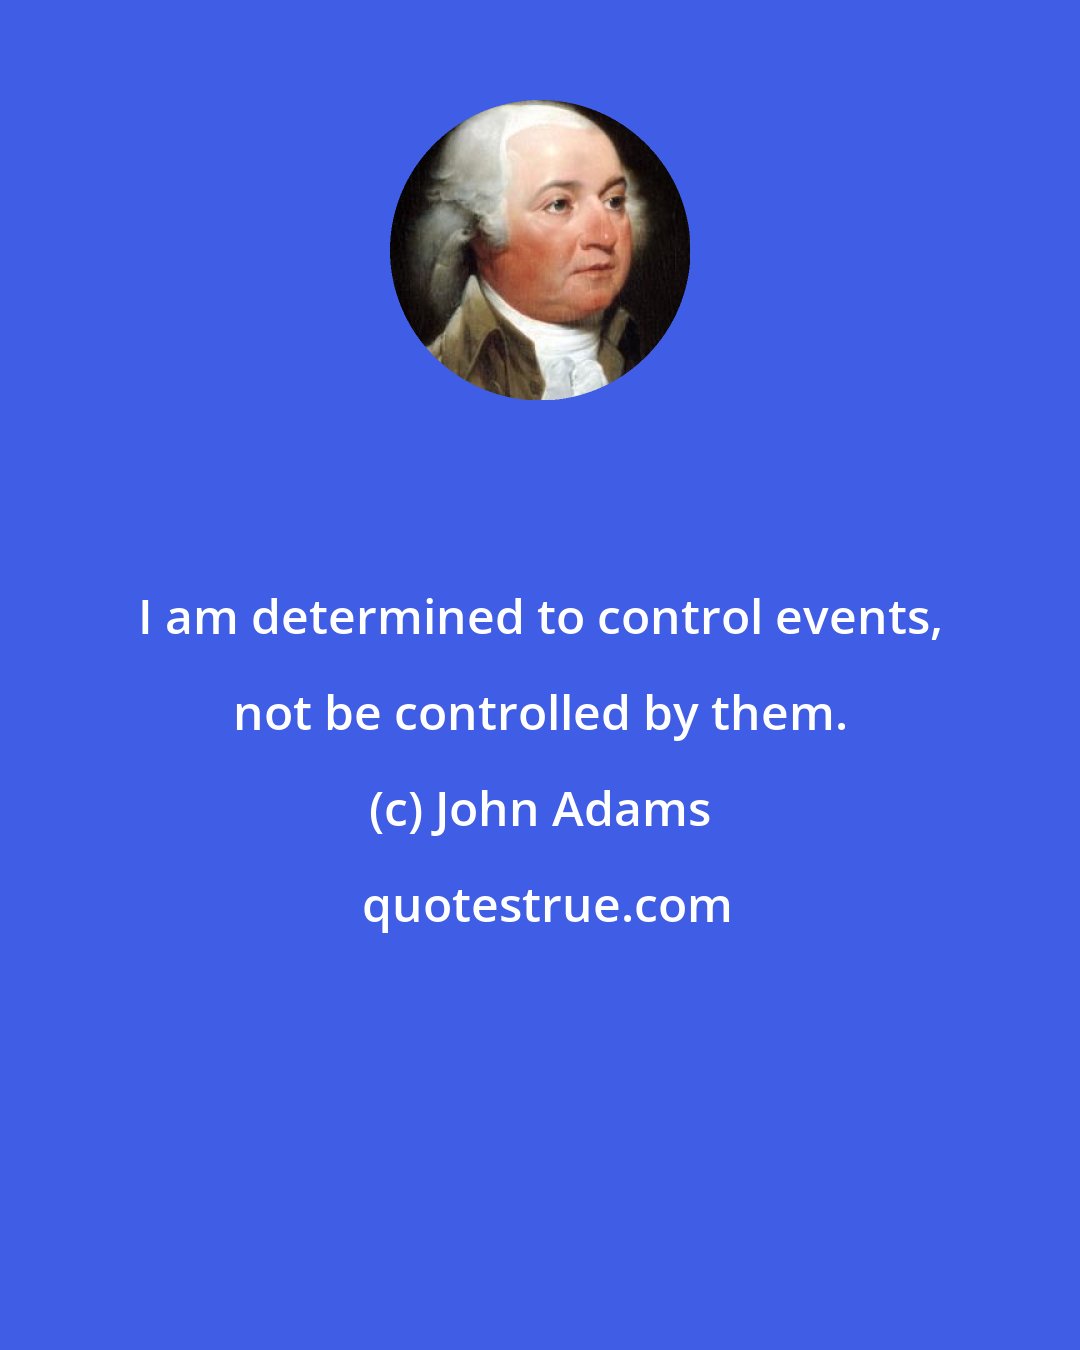 John Adams: I am determined to control events, not be controlled by them.